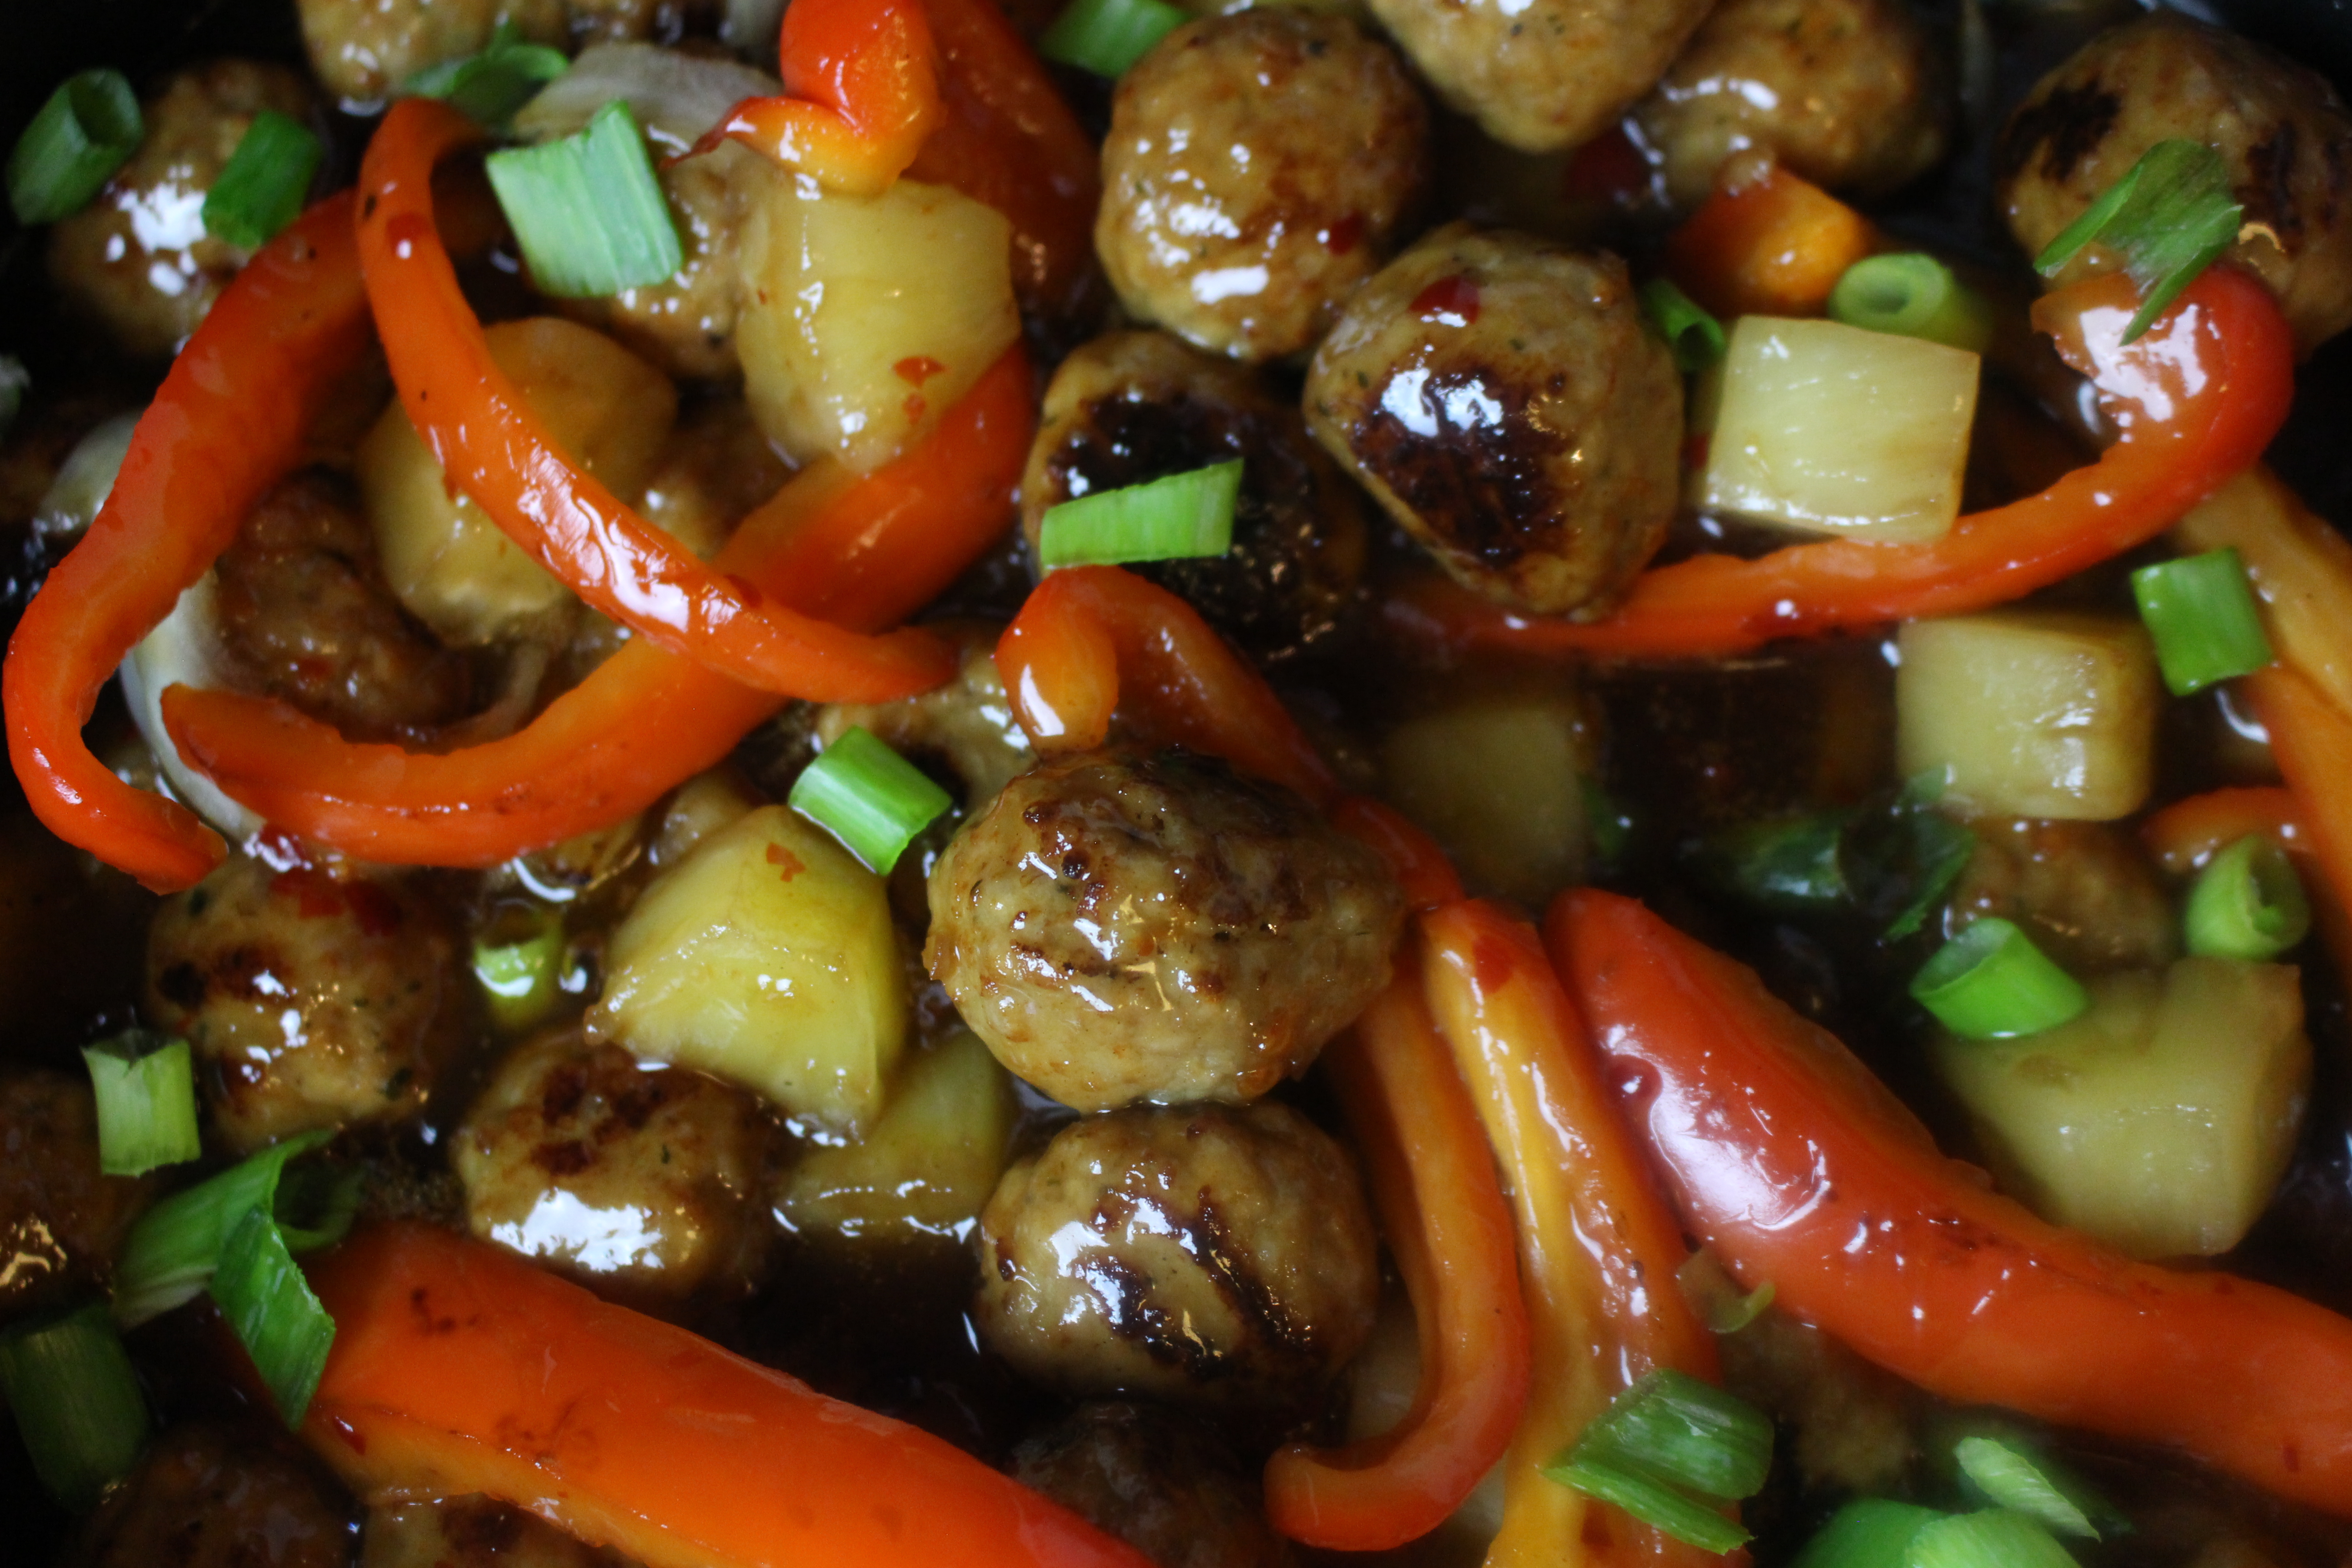 Sweet & Sour Meatballs mixed with delicious sweet peppers and tender pineapple chunks in a tangy sauce!